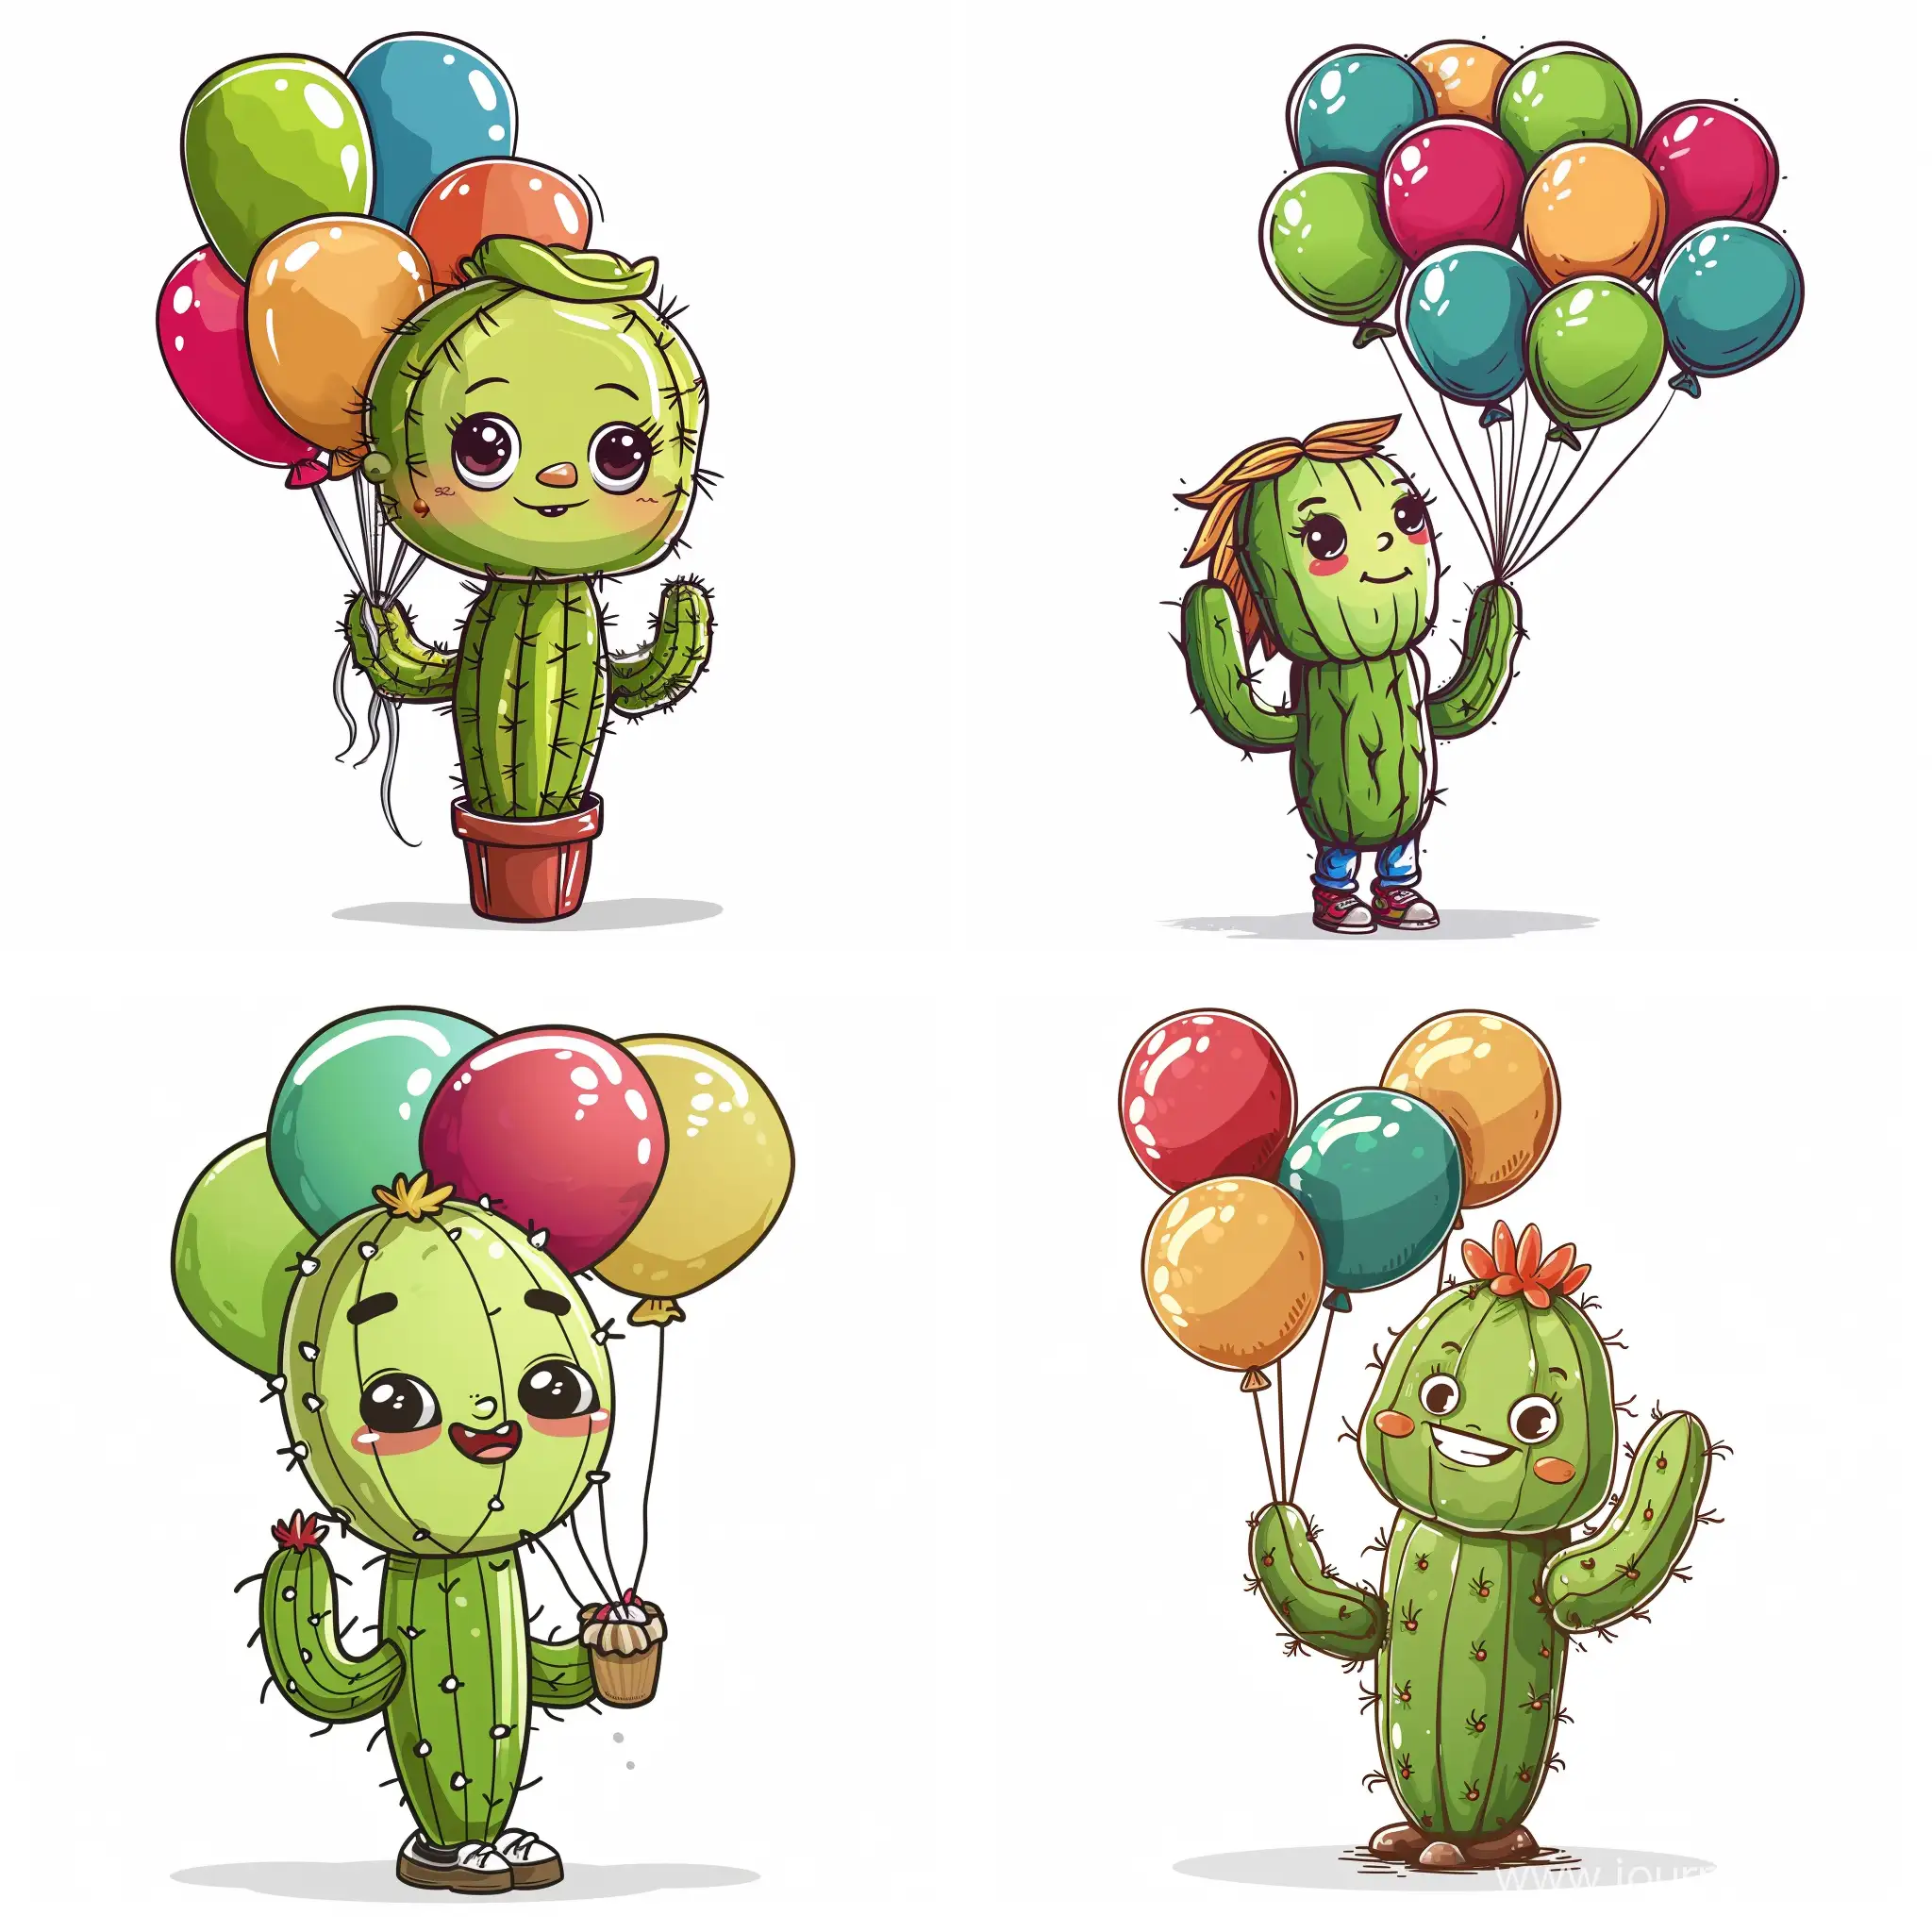 Cactus-Vendor-with-Balloons-Cheerful-Cartoon-Character-Selling-Balloons